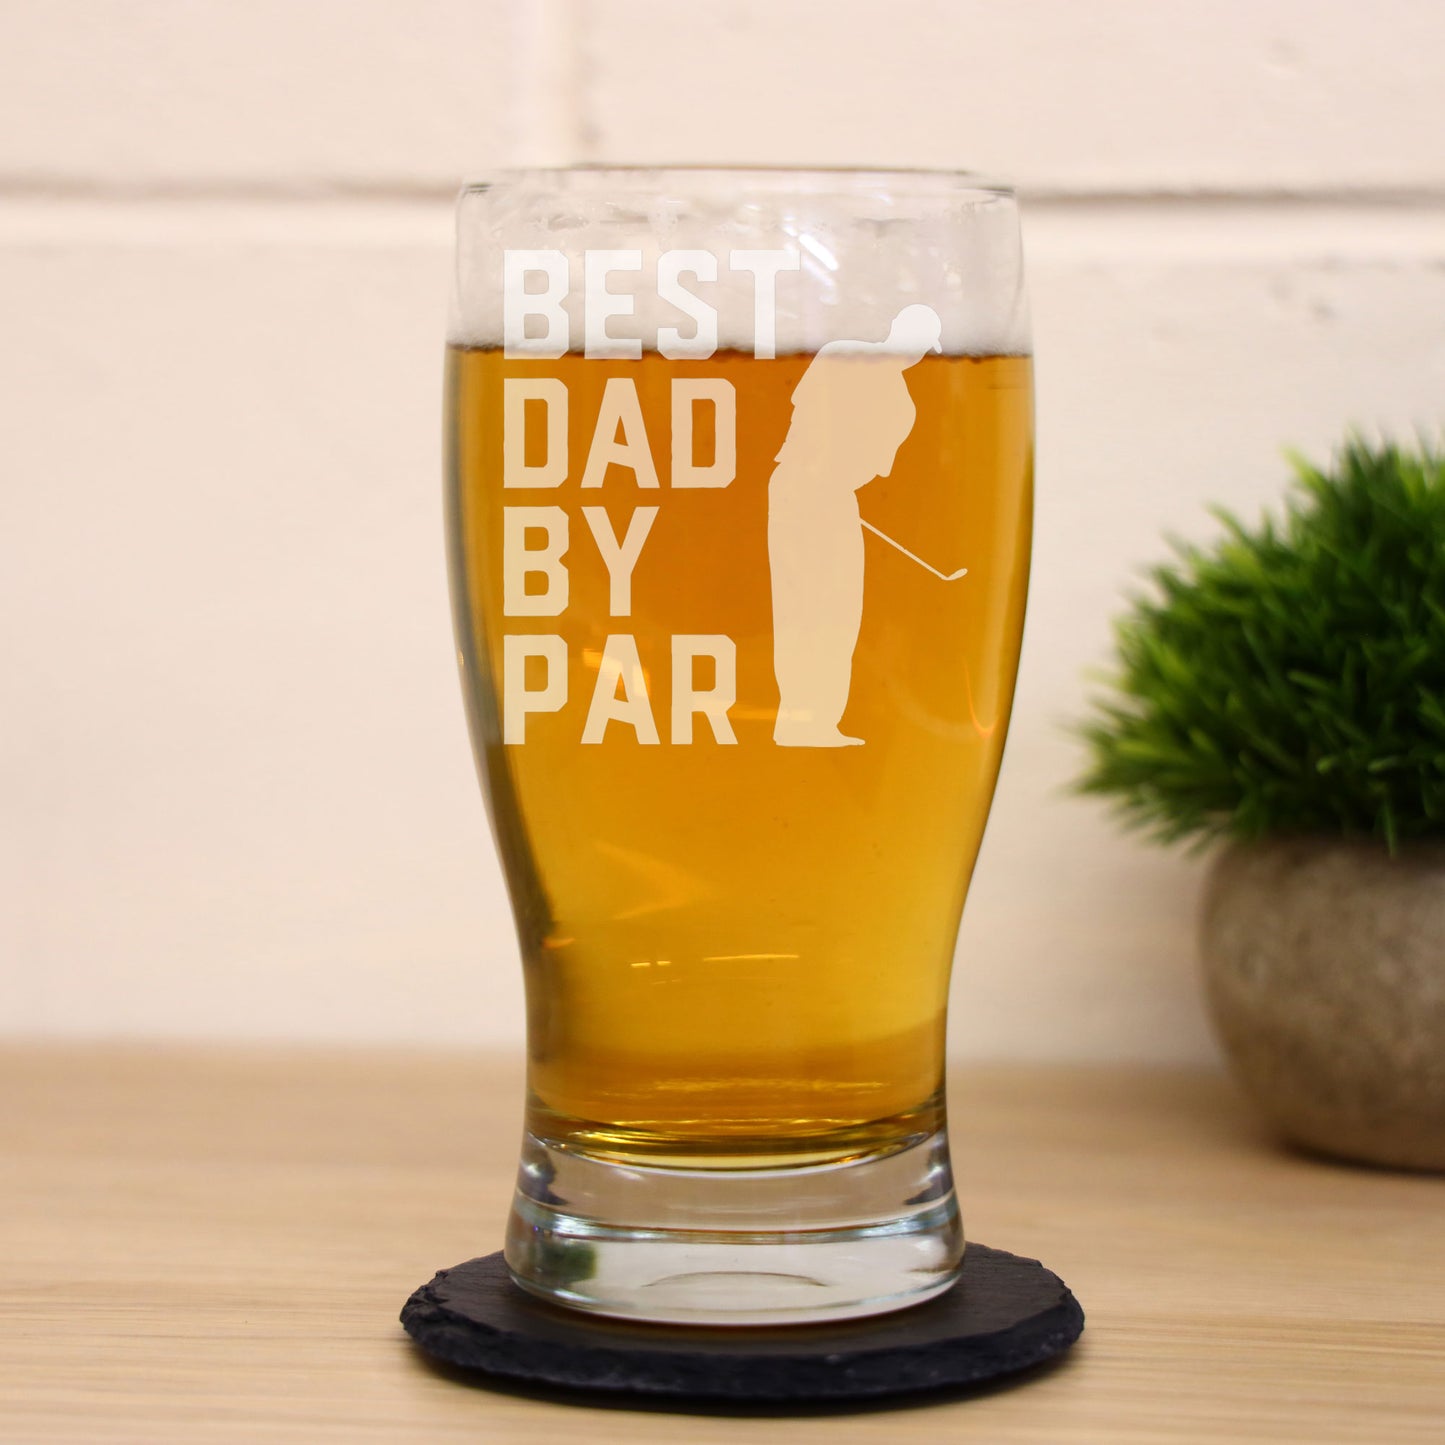 Best Dad By Par Engraved Beer Glass and/or Coaster Set  - Always Looking Good -   